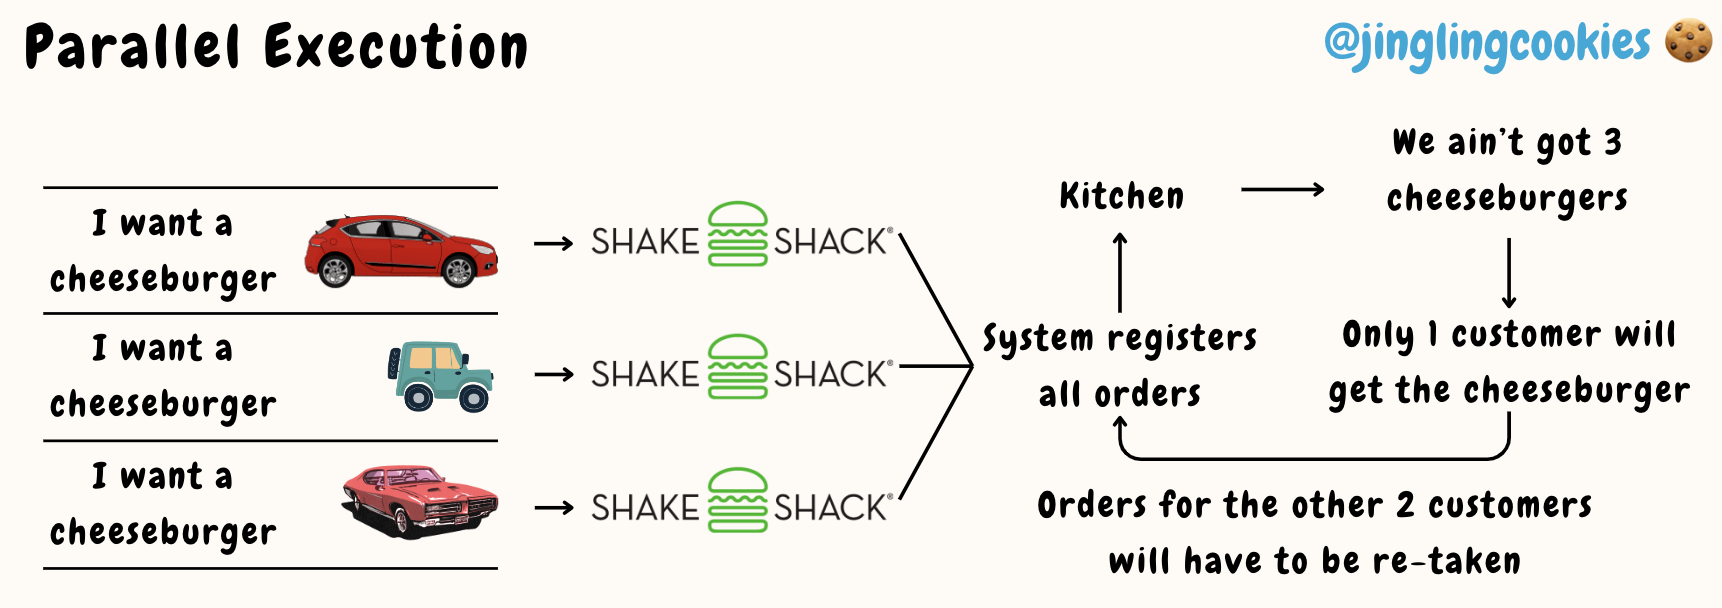 Parallel Execution: The Shake-Shack Drive-through